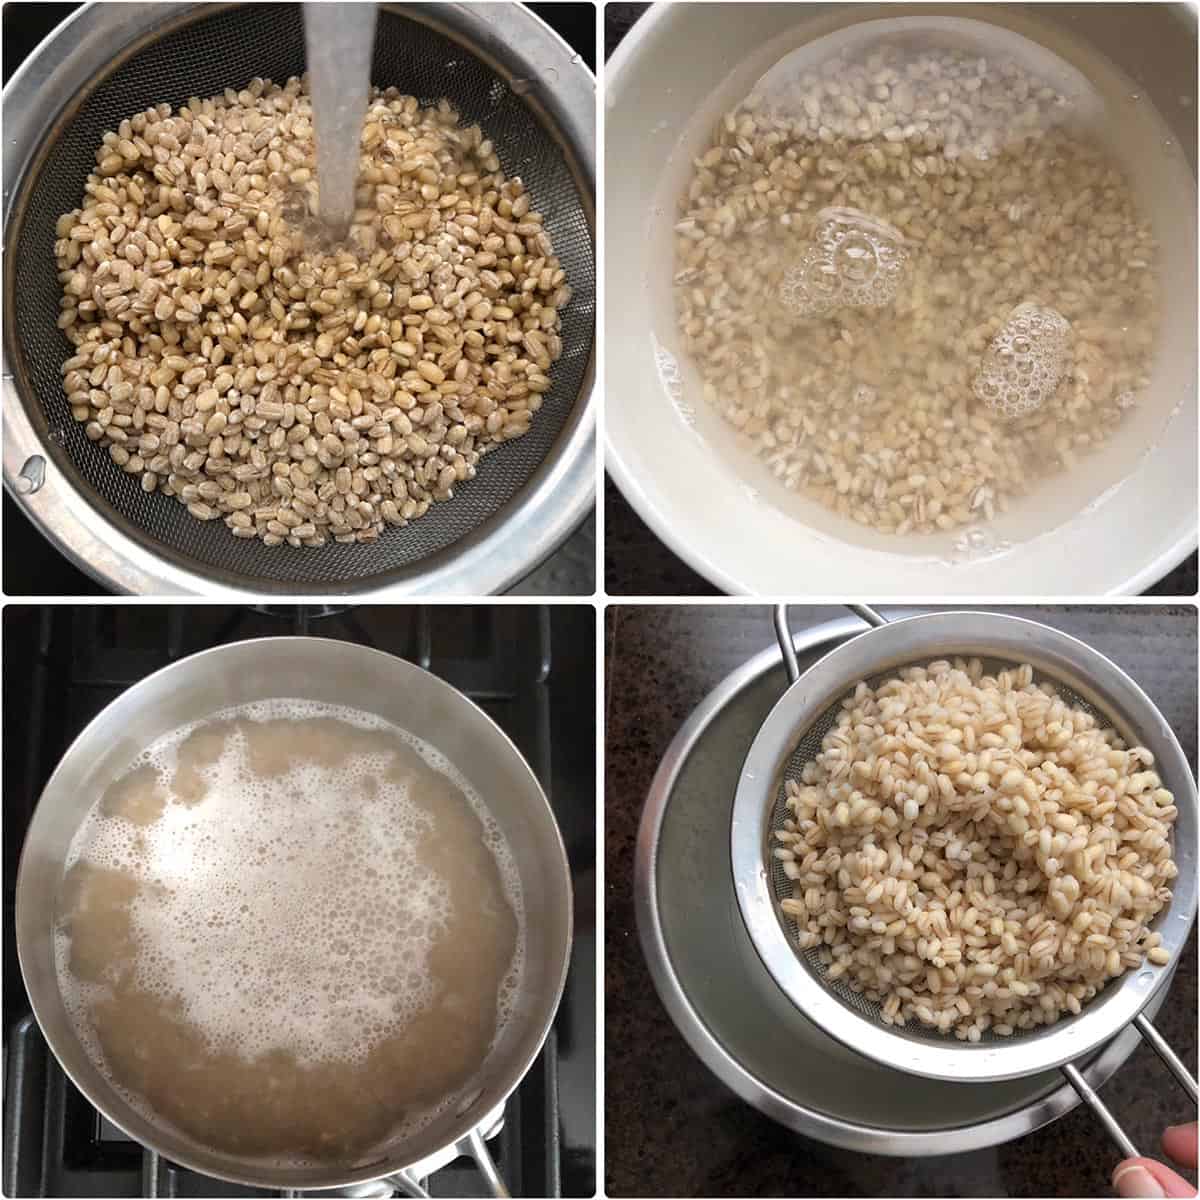 Step by step photos showing the rinsing and soaking of barley